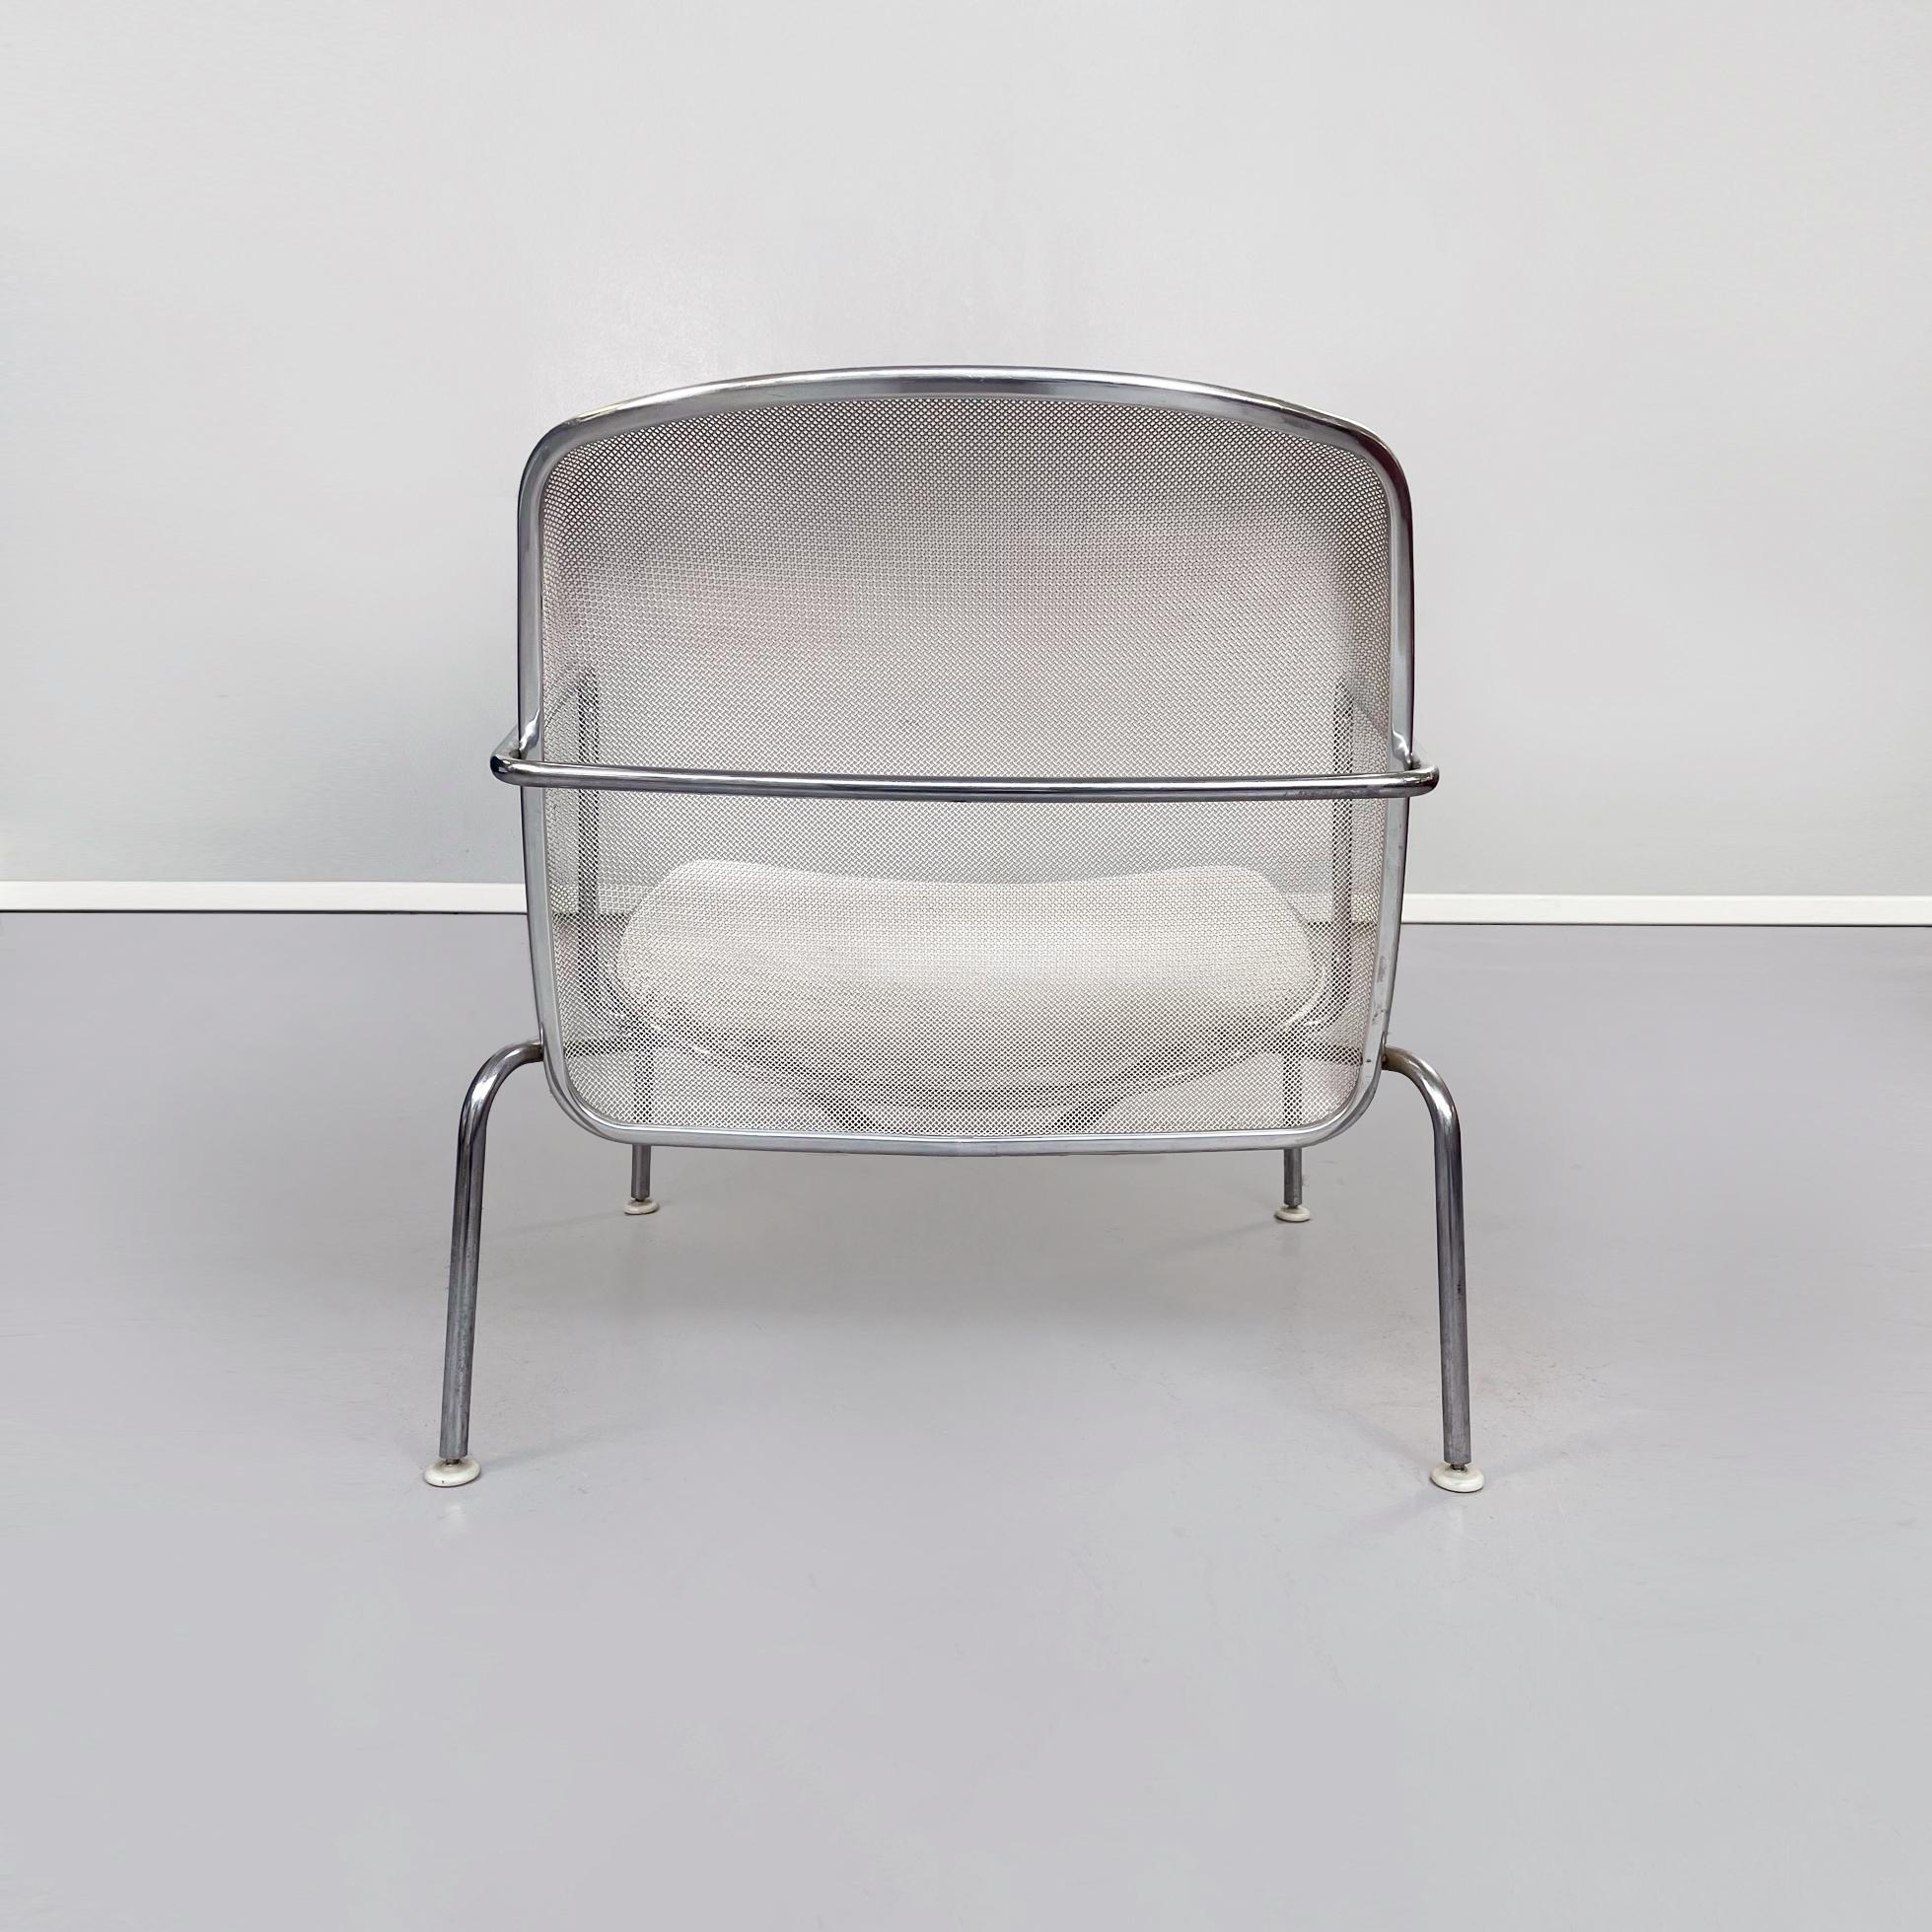 Contemporary Italian 21st Century White Metal Steel Web Armchairs by Citterio for B&B, 2000s For Sale